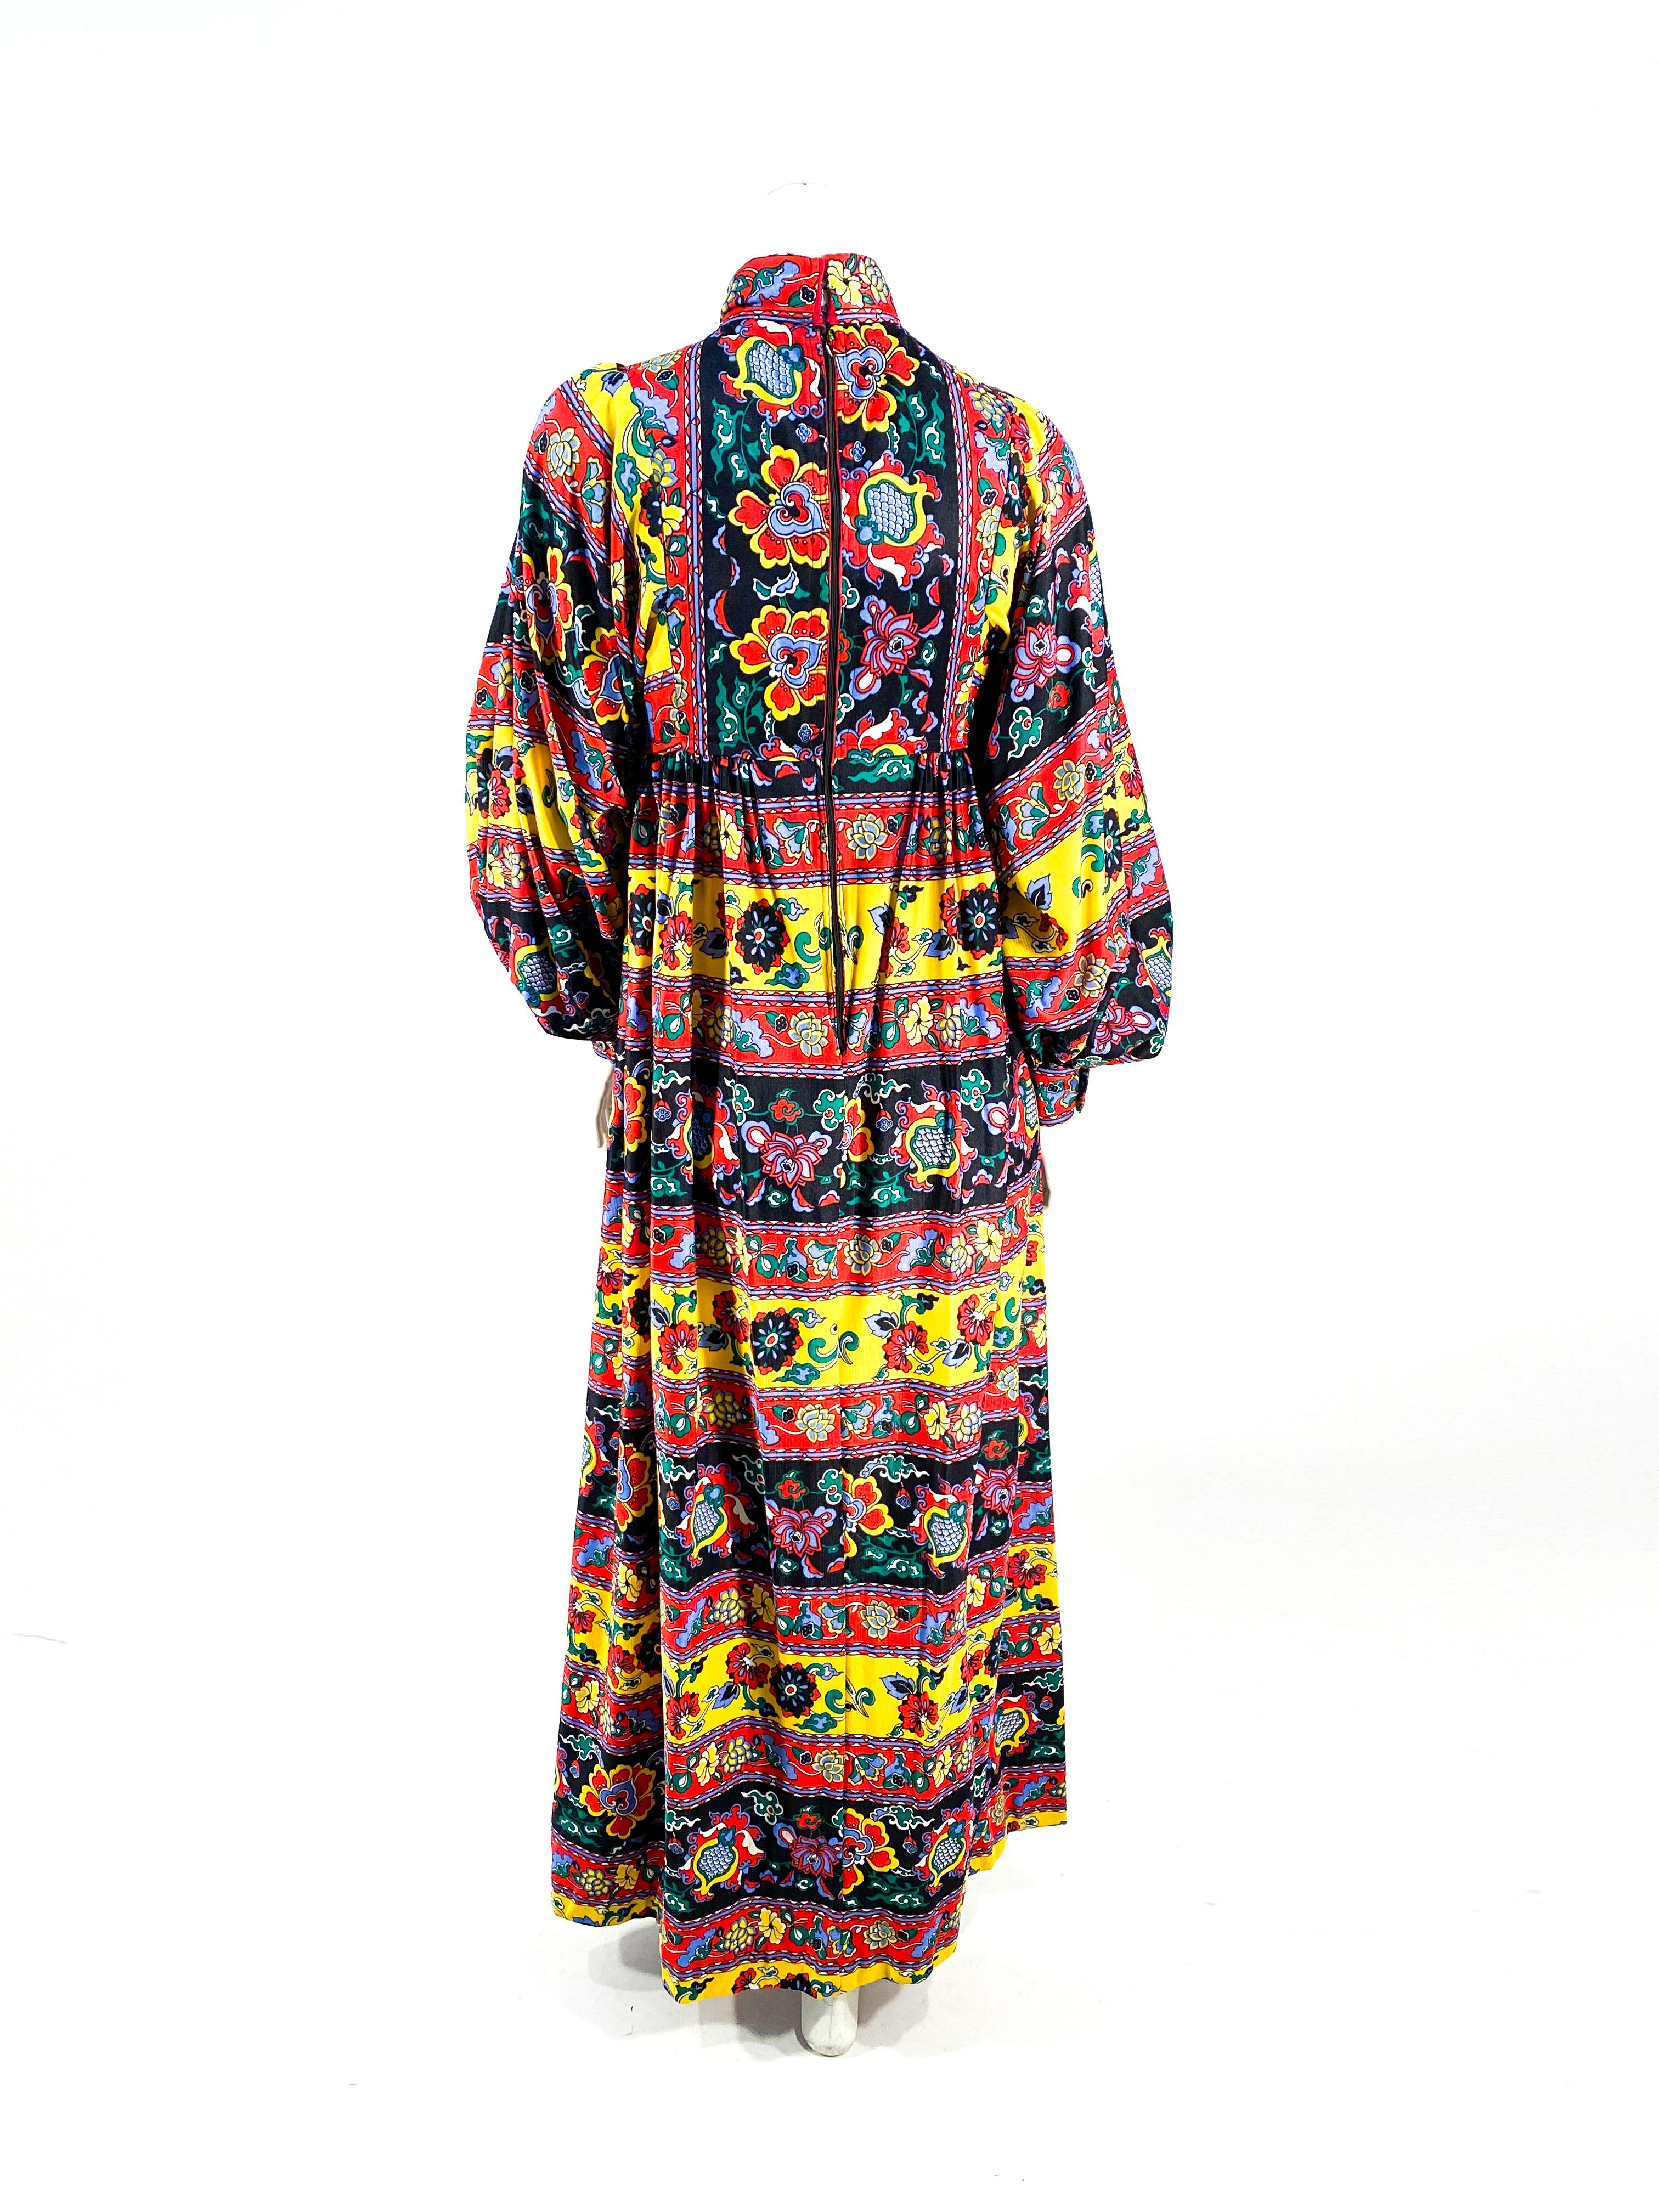 1970s Jewel-Toned Paisley Printed Peasant Dress For Sale 3